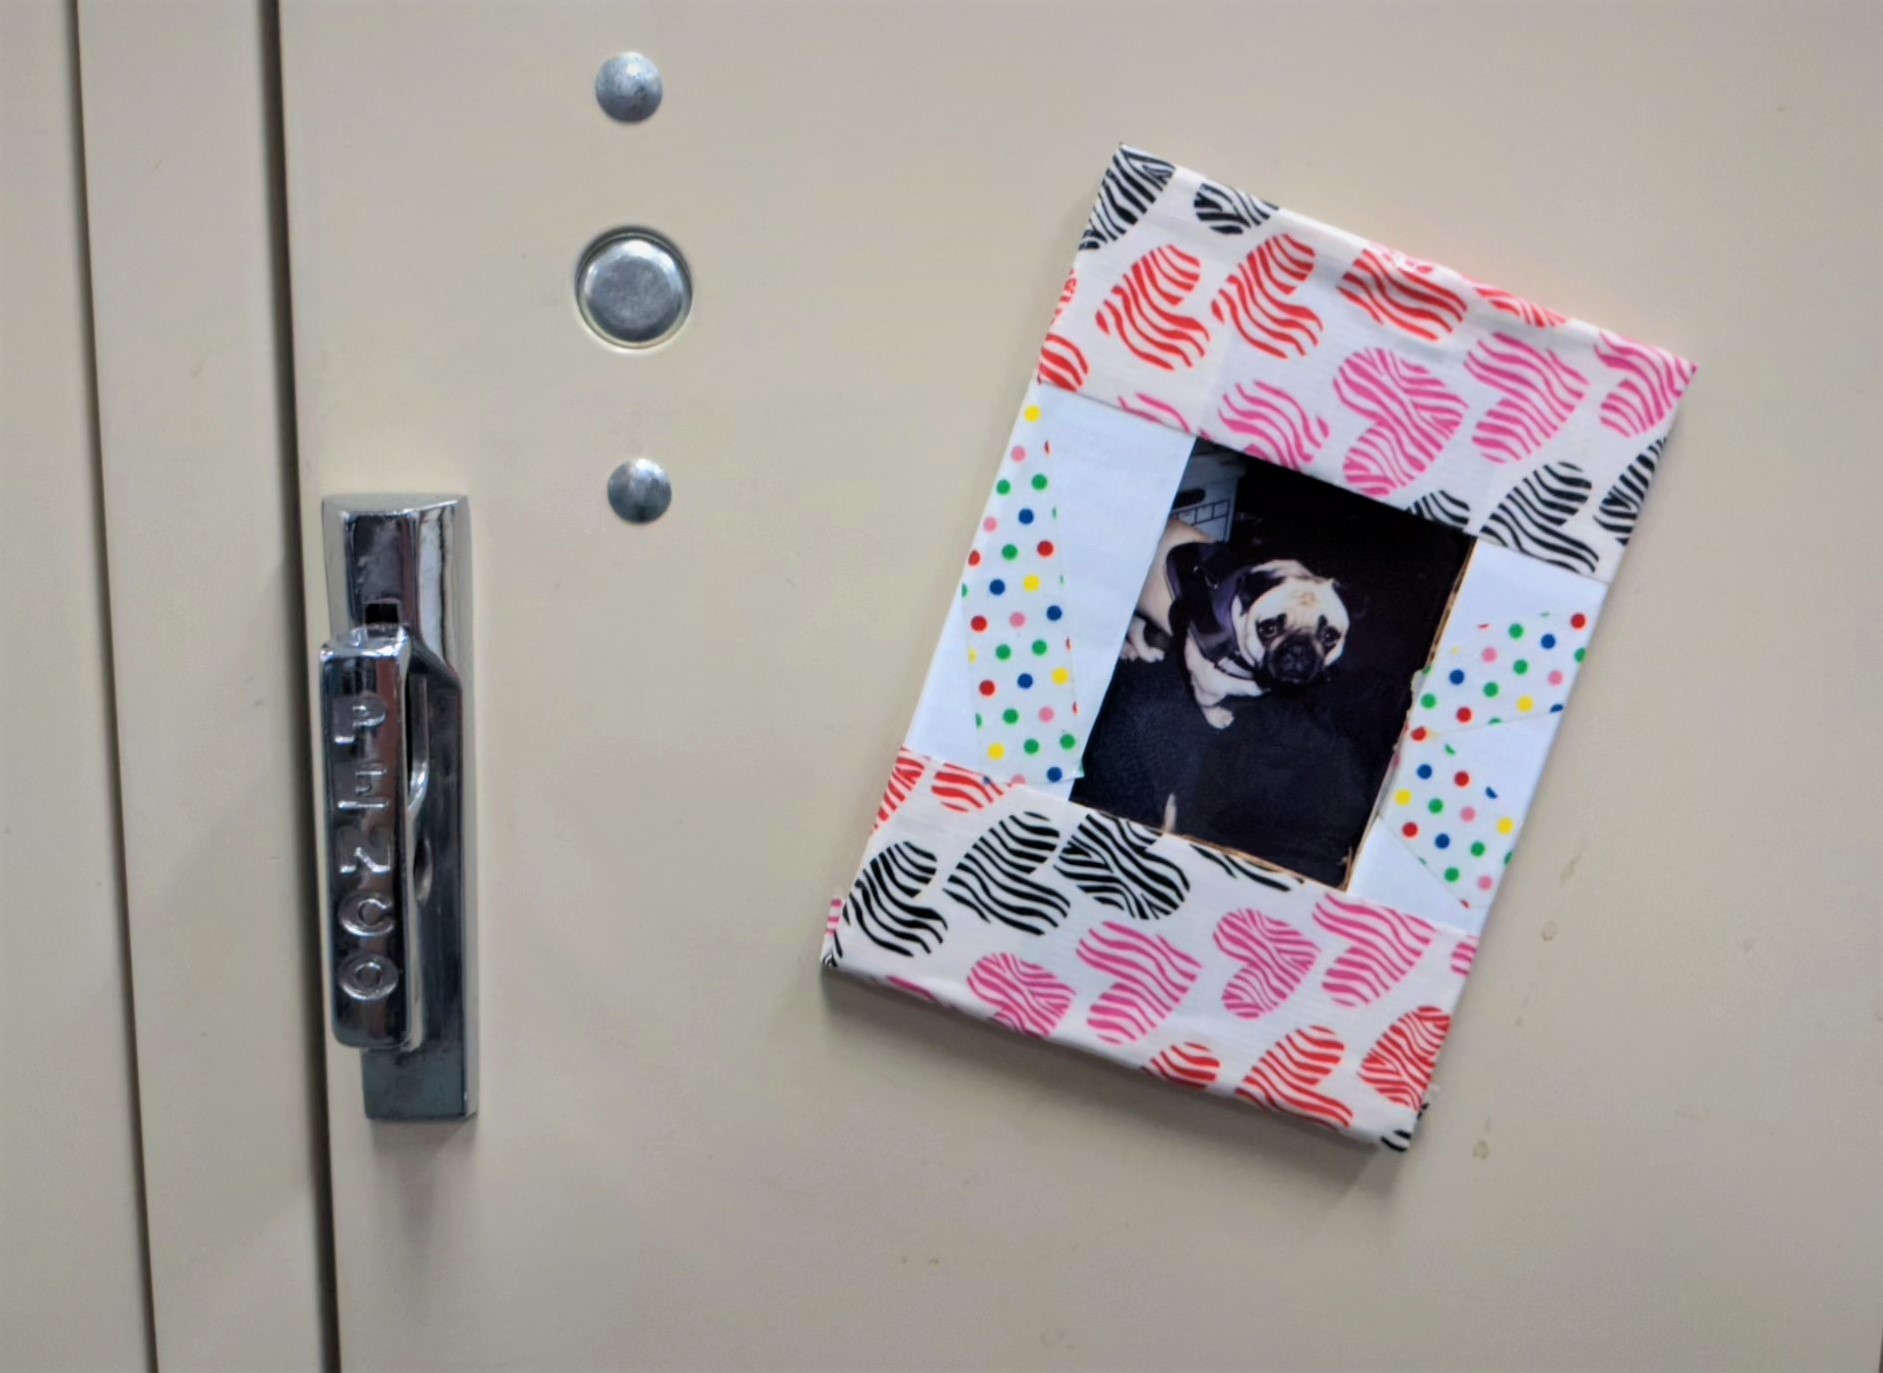 heart pattern and white duct tape photo frame of pug on a locker